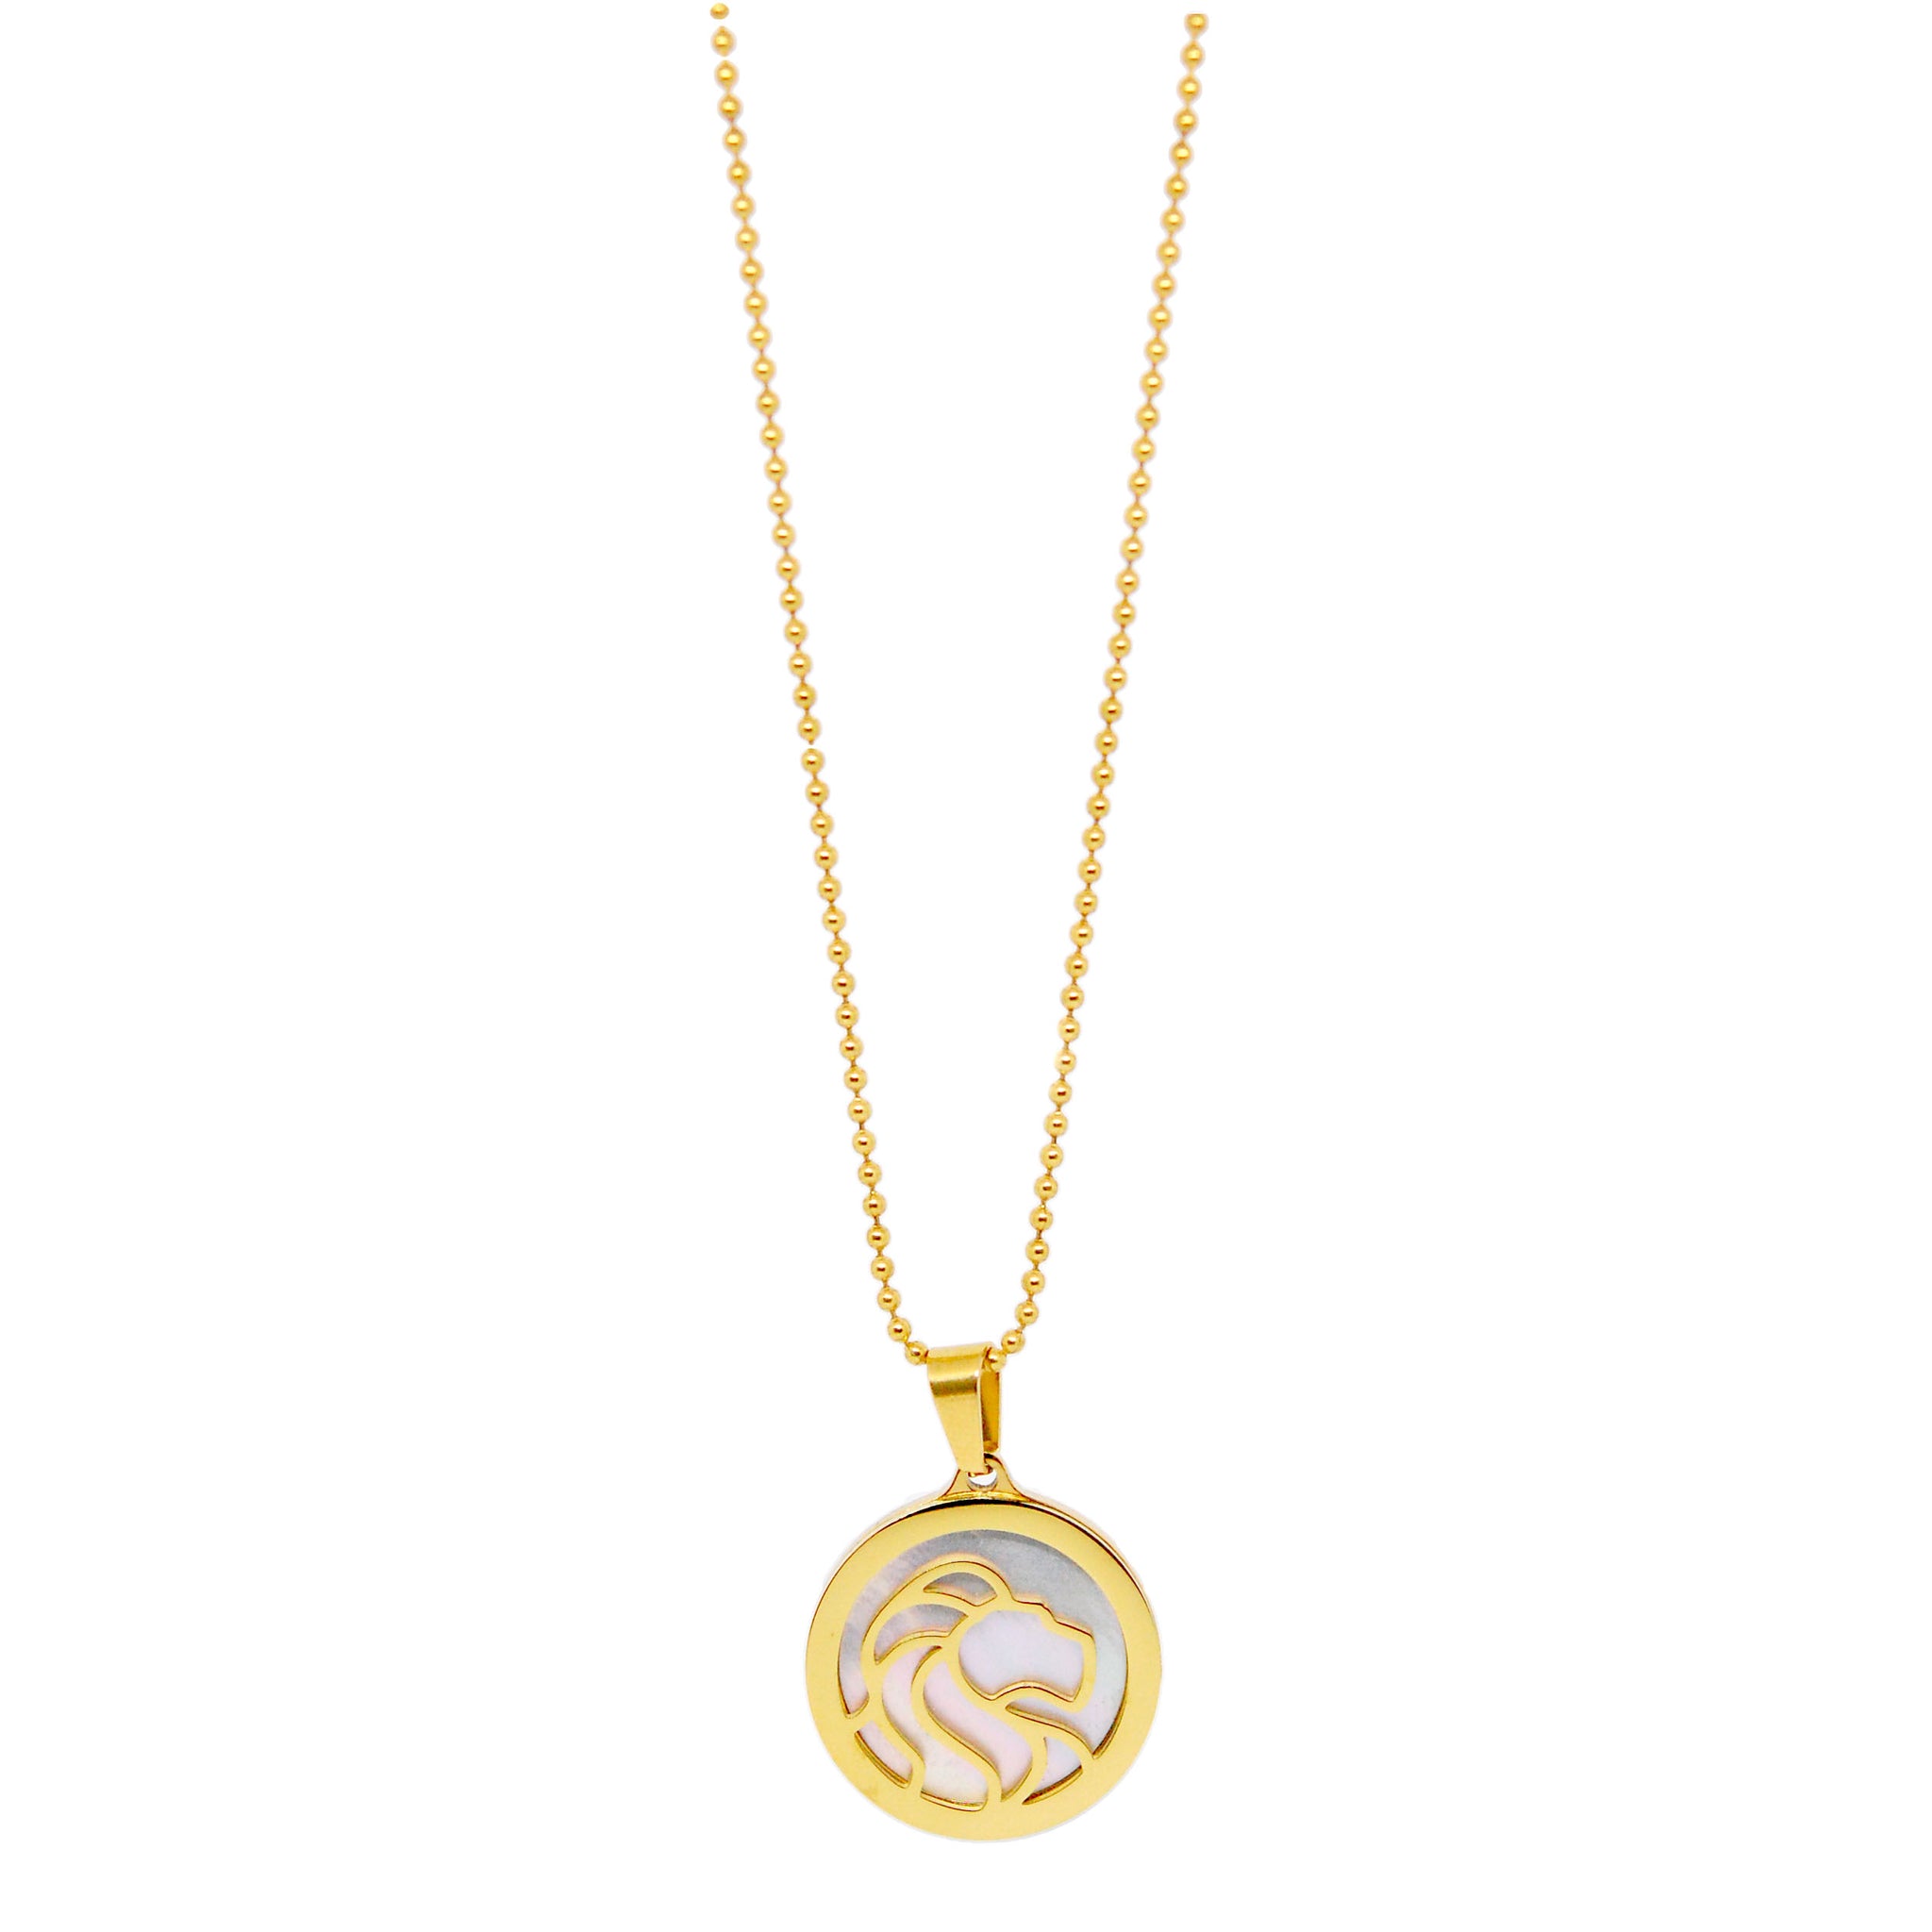 ESN 7963: All IPG Mop Leo Zodiac Necklace w/ 18" IPG Ball Chain